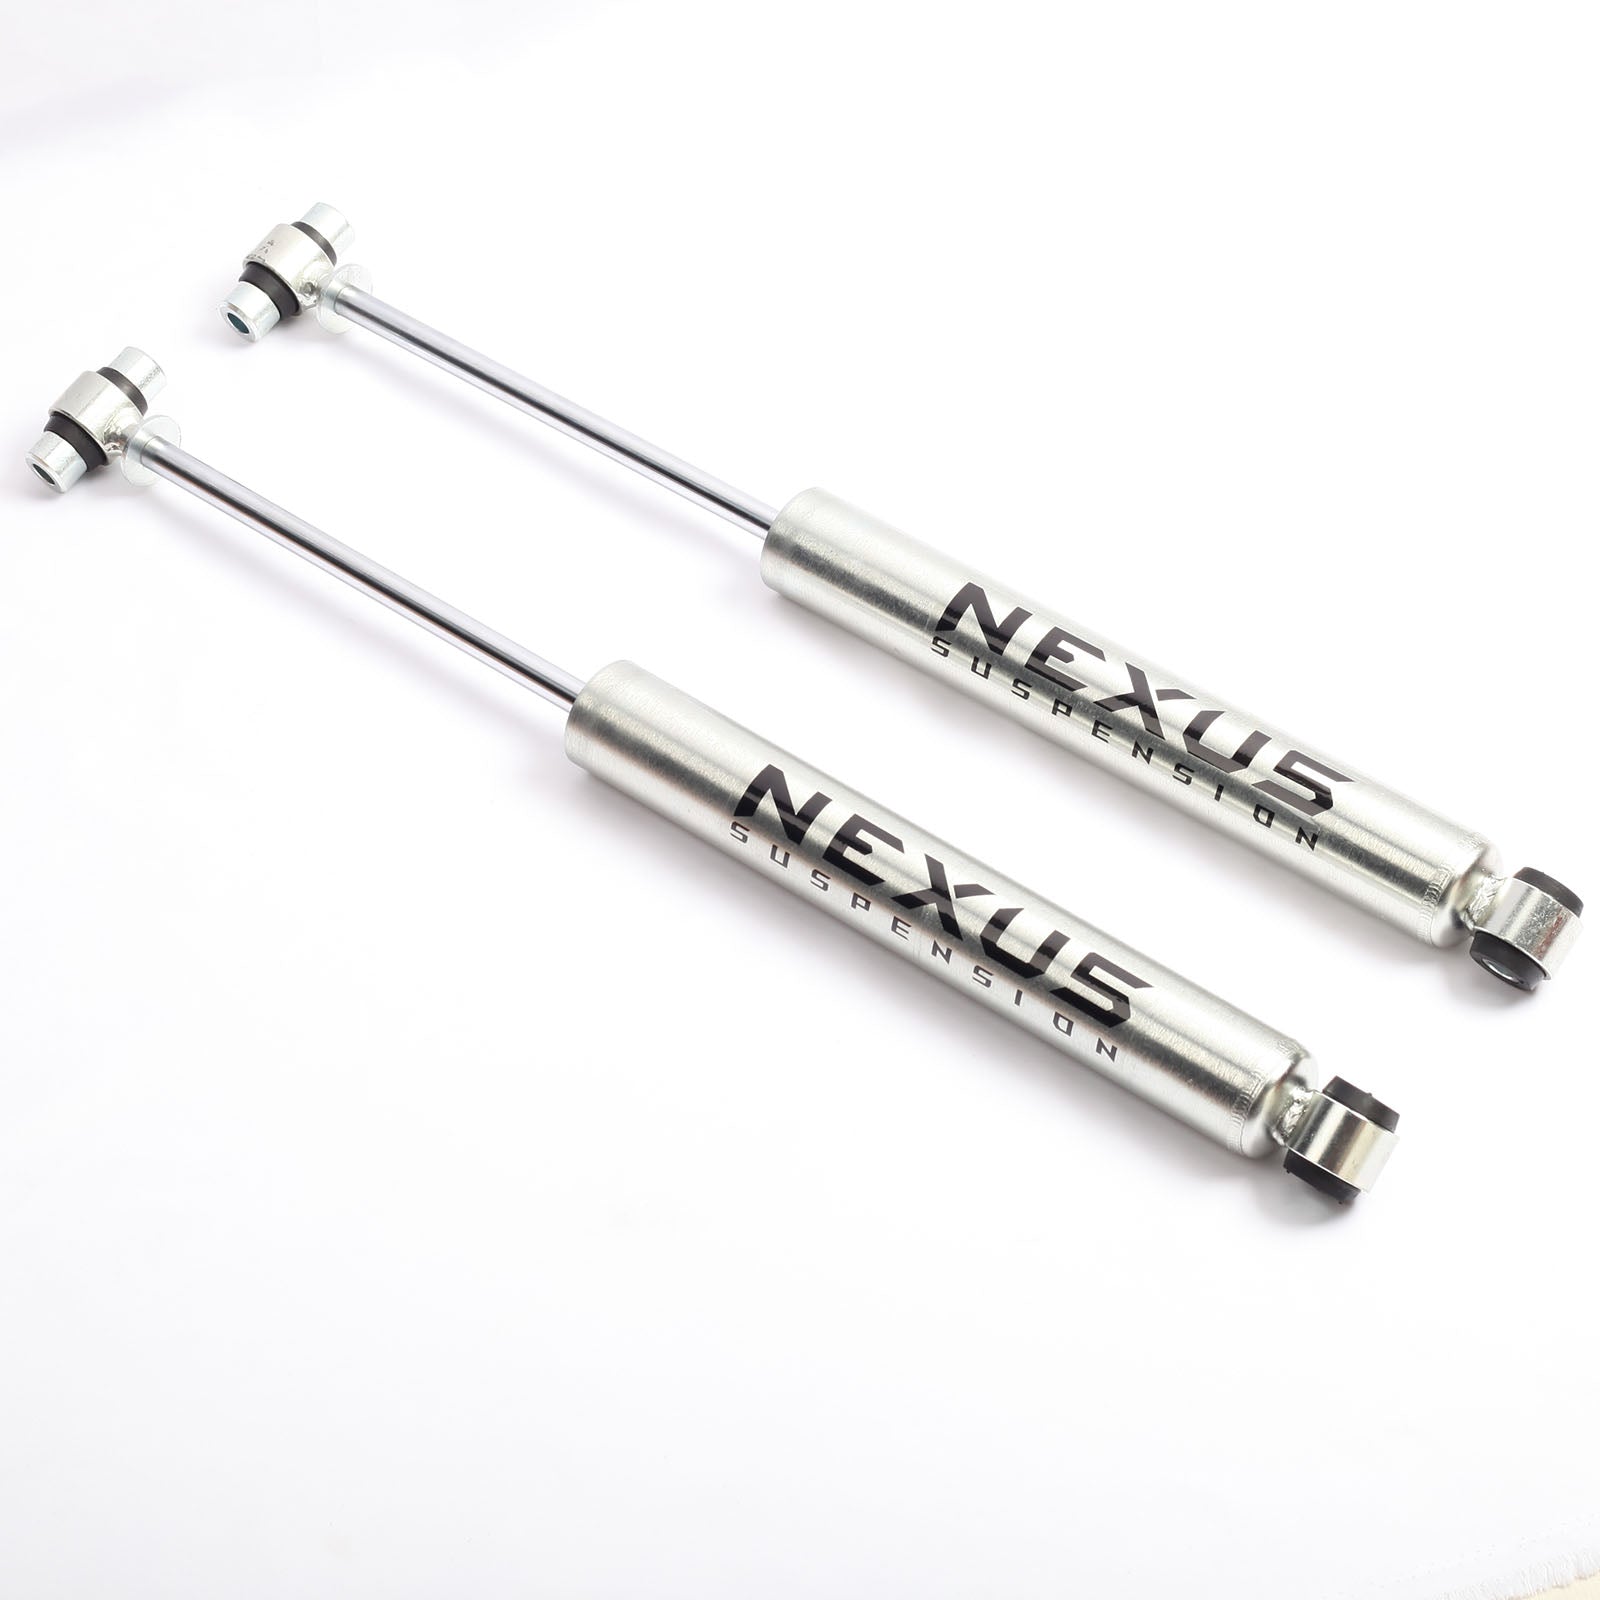 NEXUS SUSPENSION 0 Inch Lift Rear Shock Absorber for 2002-2008 Dodge RAM 1500 2wd,Zinc Plated Coating,Pair Pack